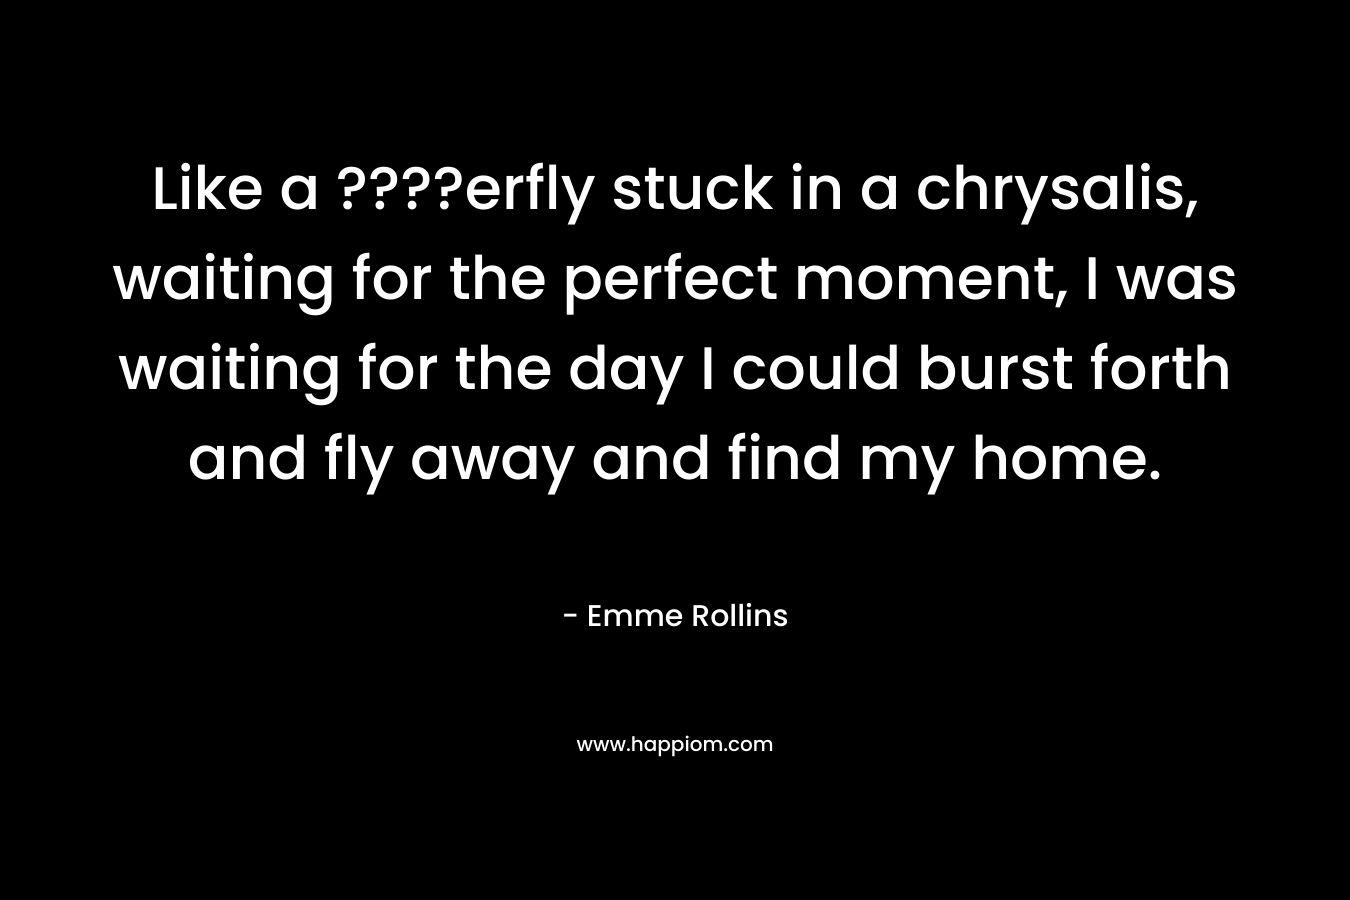 Like a ????erfly stuck in a chrysalis, waiting for the perfect moment, I was waiting for the day I could burst forth and fly away and find my home. – Emme Rollins